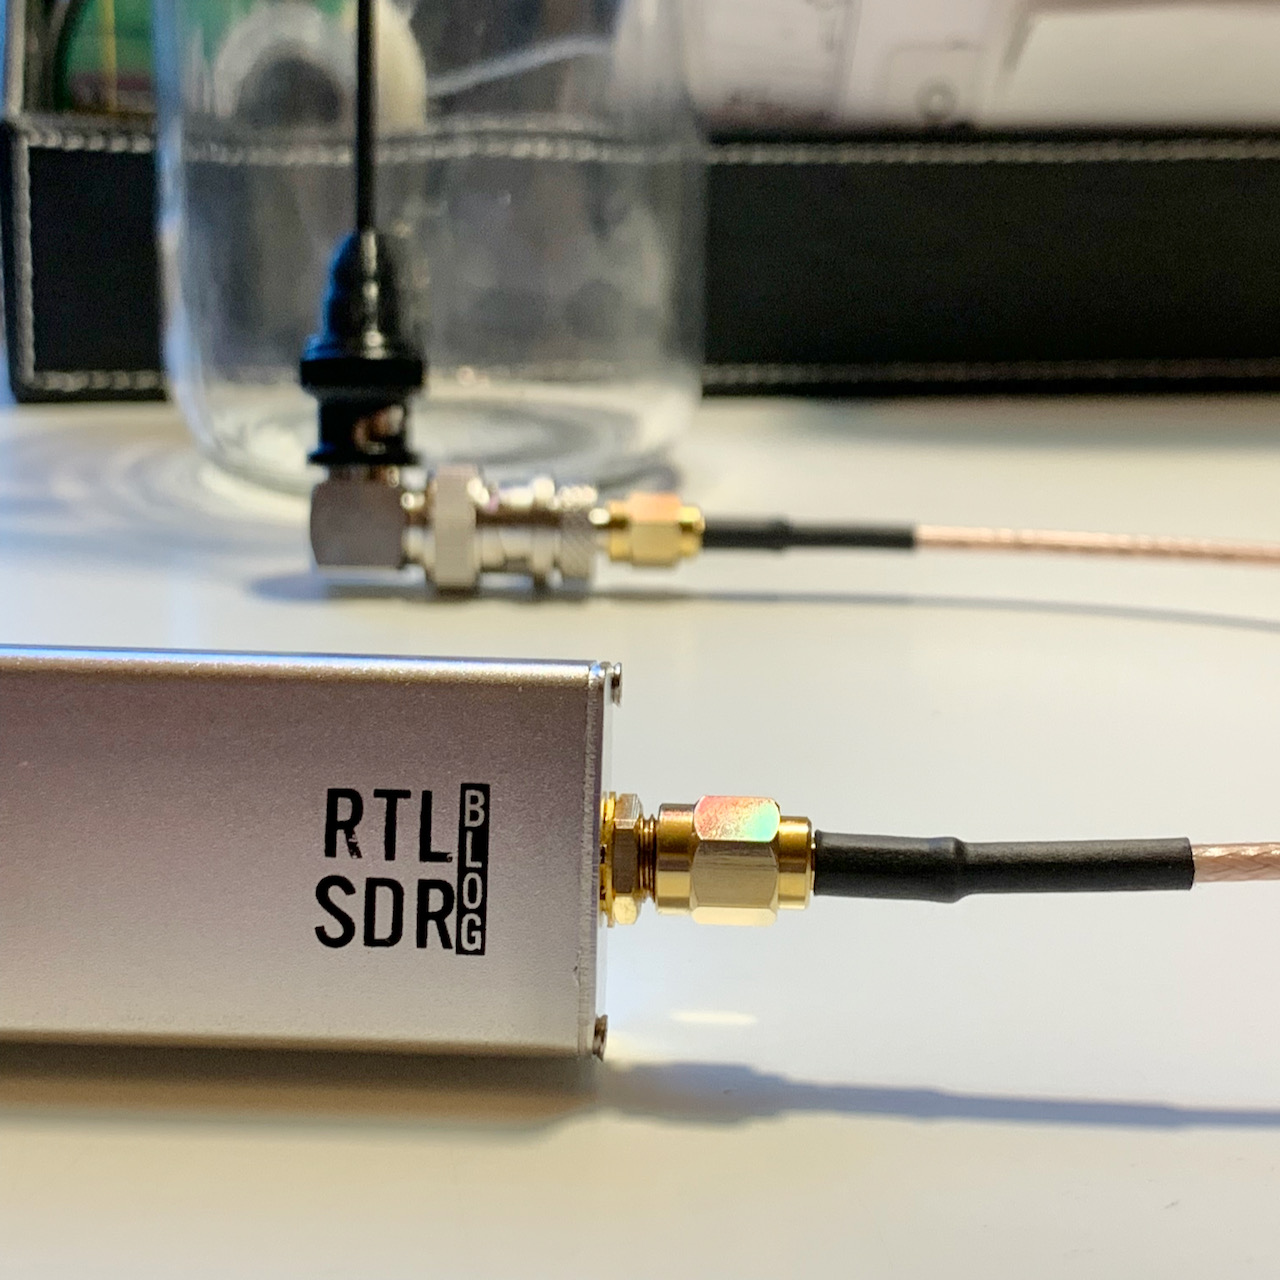 RF always needs a lot of adapters&hellip; antenna from here, though even a well-cut length of wire probably works fine at these very short ranges